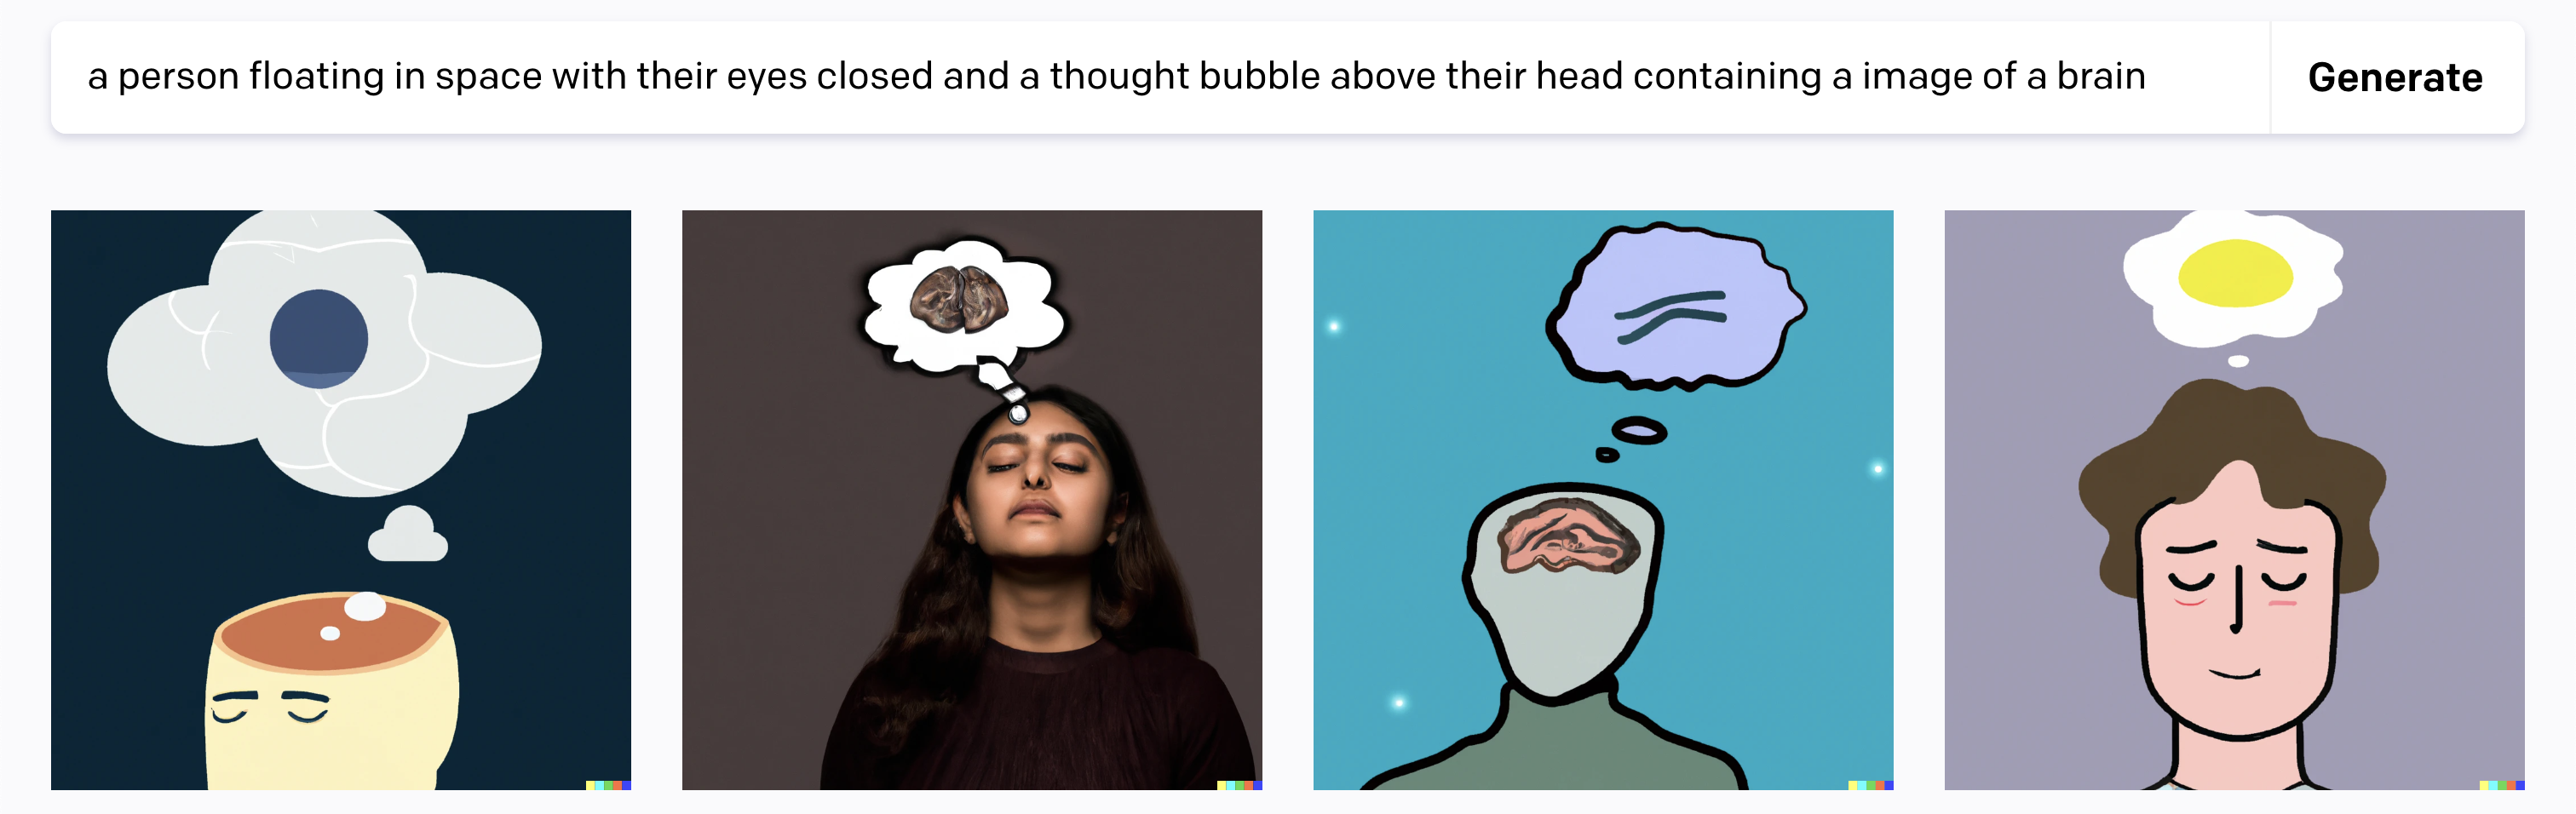 a person floating in space with their eyes closed and a thought bubble above their head containing a image of a brain